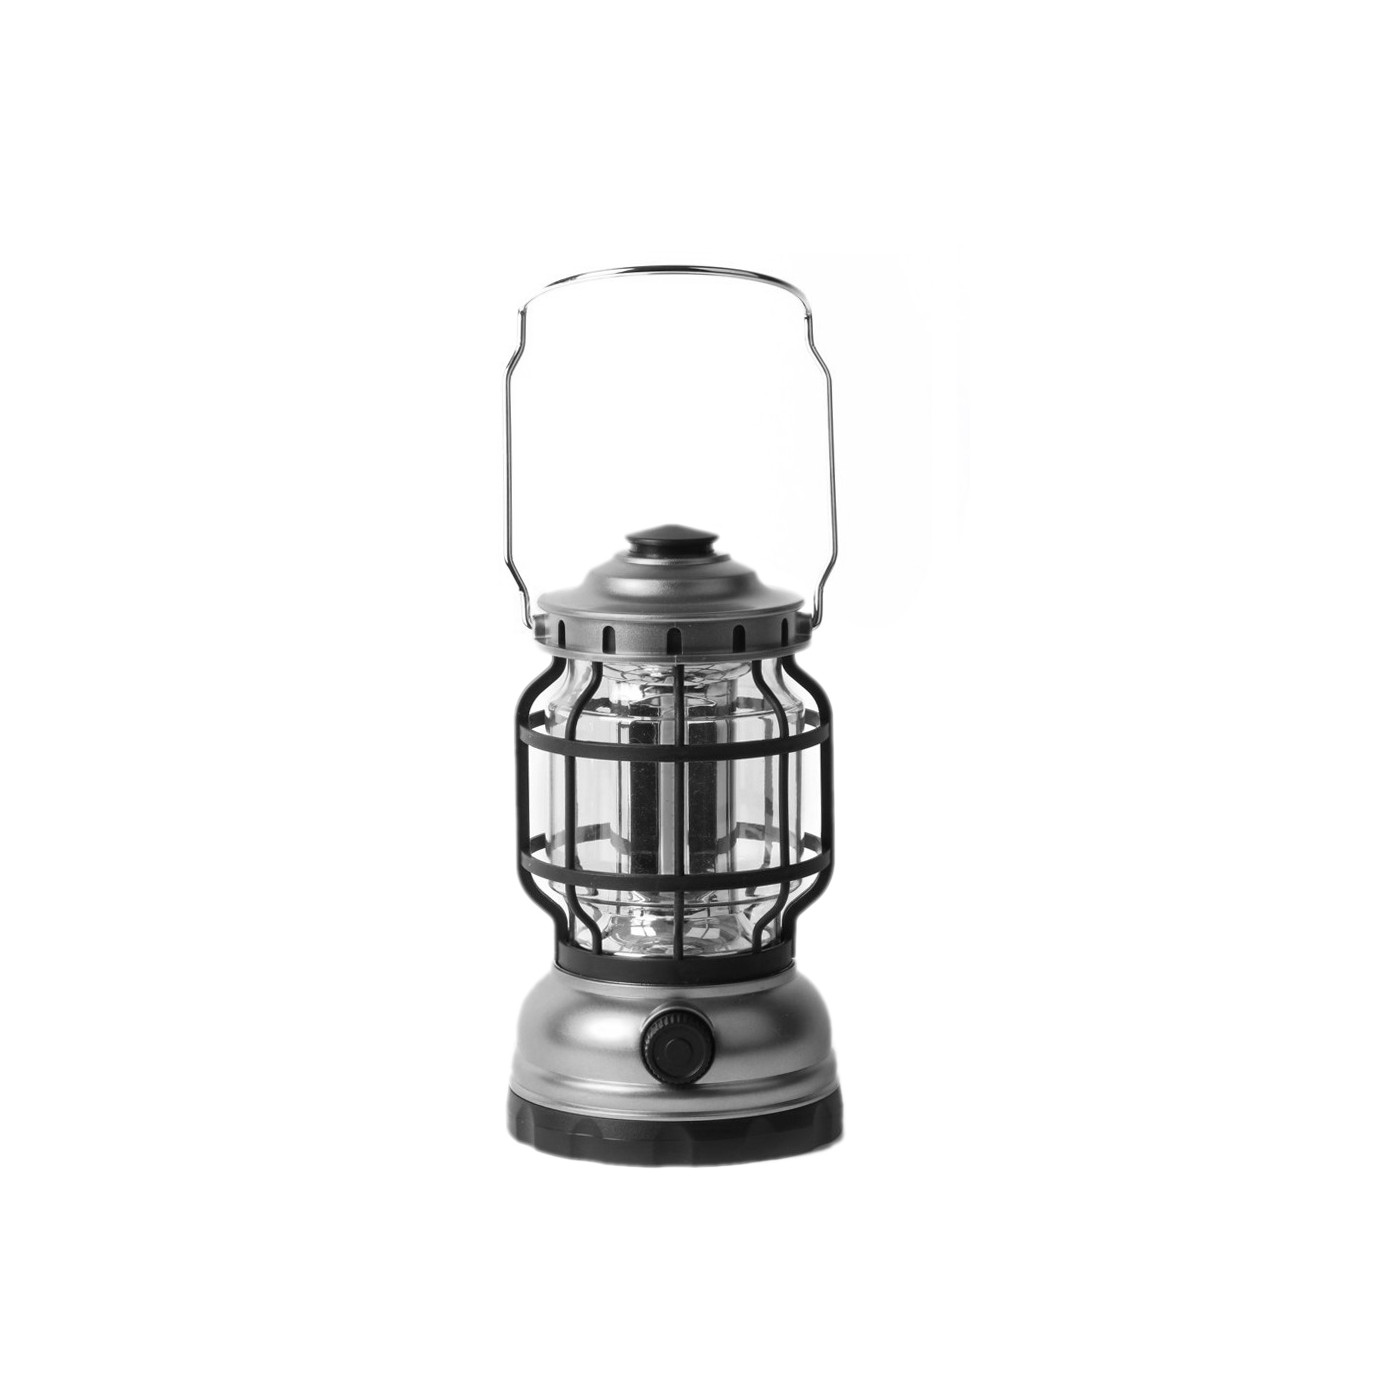 Retro camping lamp (dimmable, battery operated, silver)